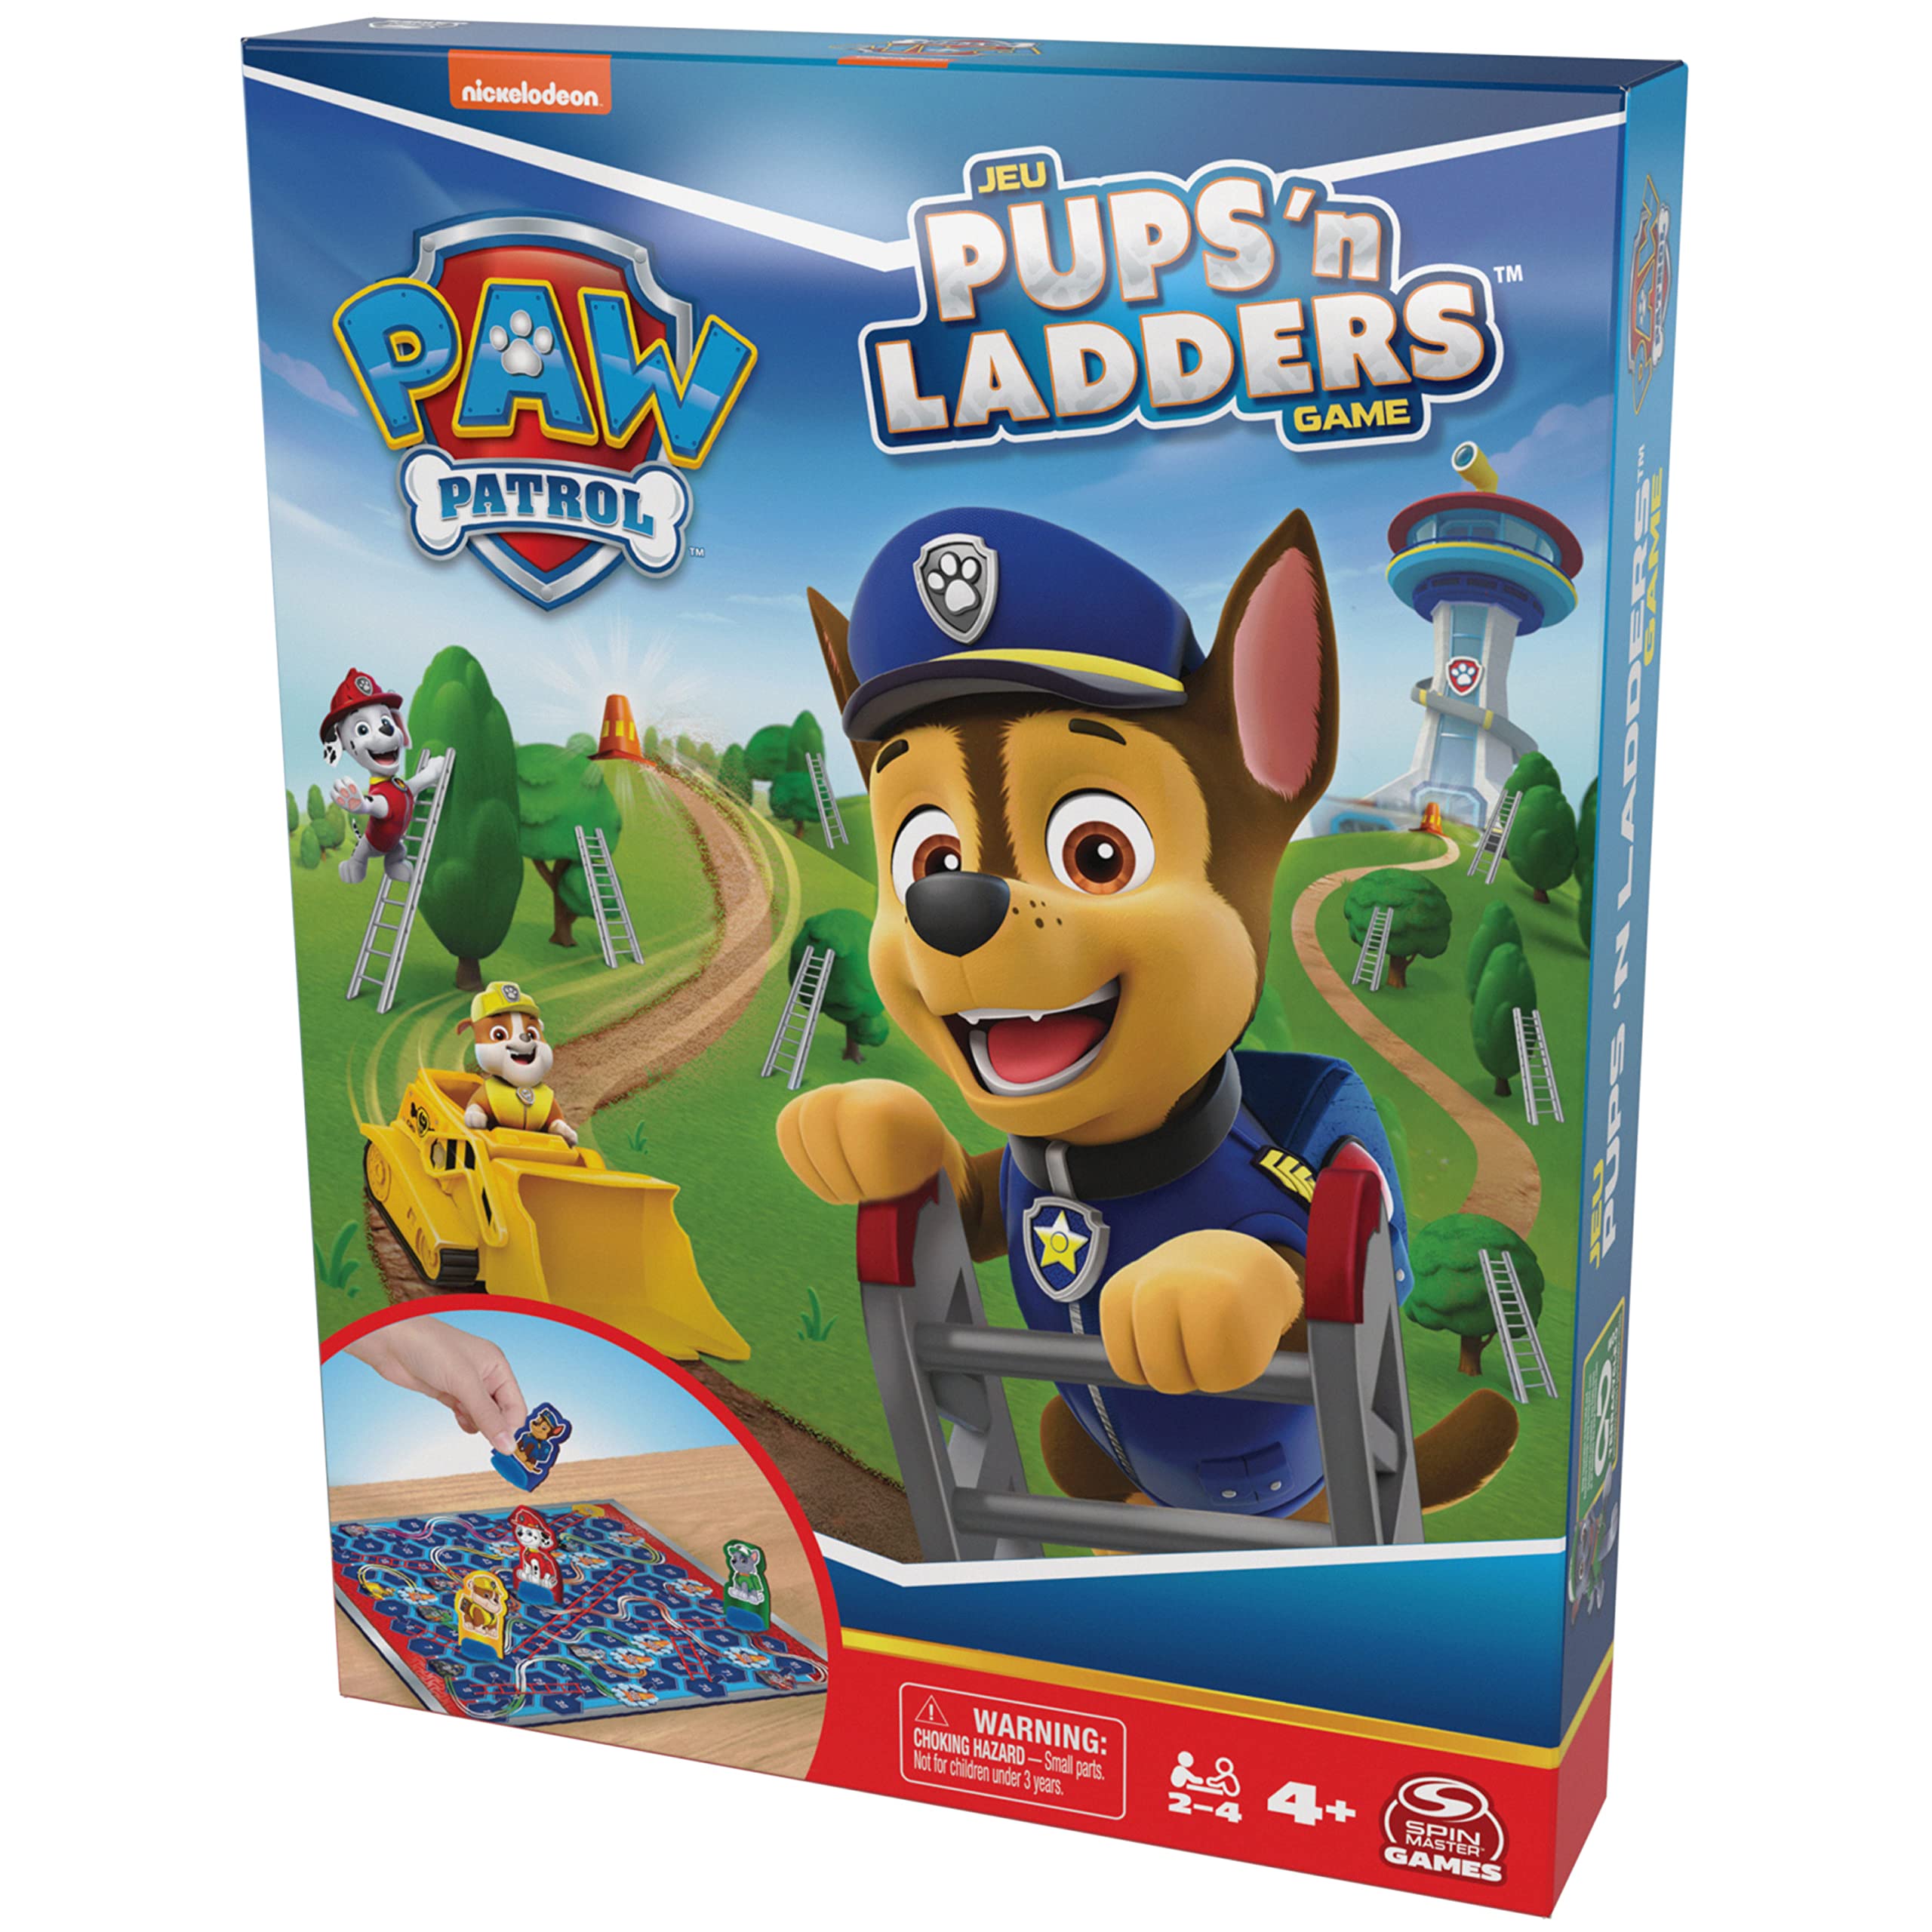 PAW Patrol Pups ‘N Ladders Game | PAW Patrol Toys Toddler Toys Kids Toys | Games for Girls Fun Games Family Games Kids Games, for Preschoolers Ages 4 and up